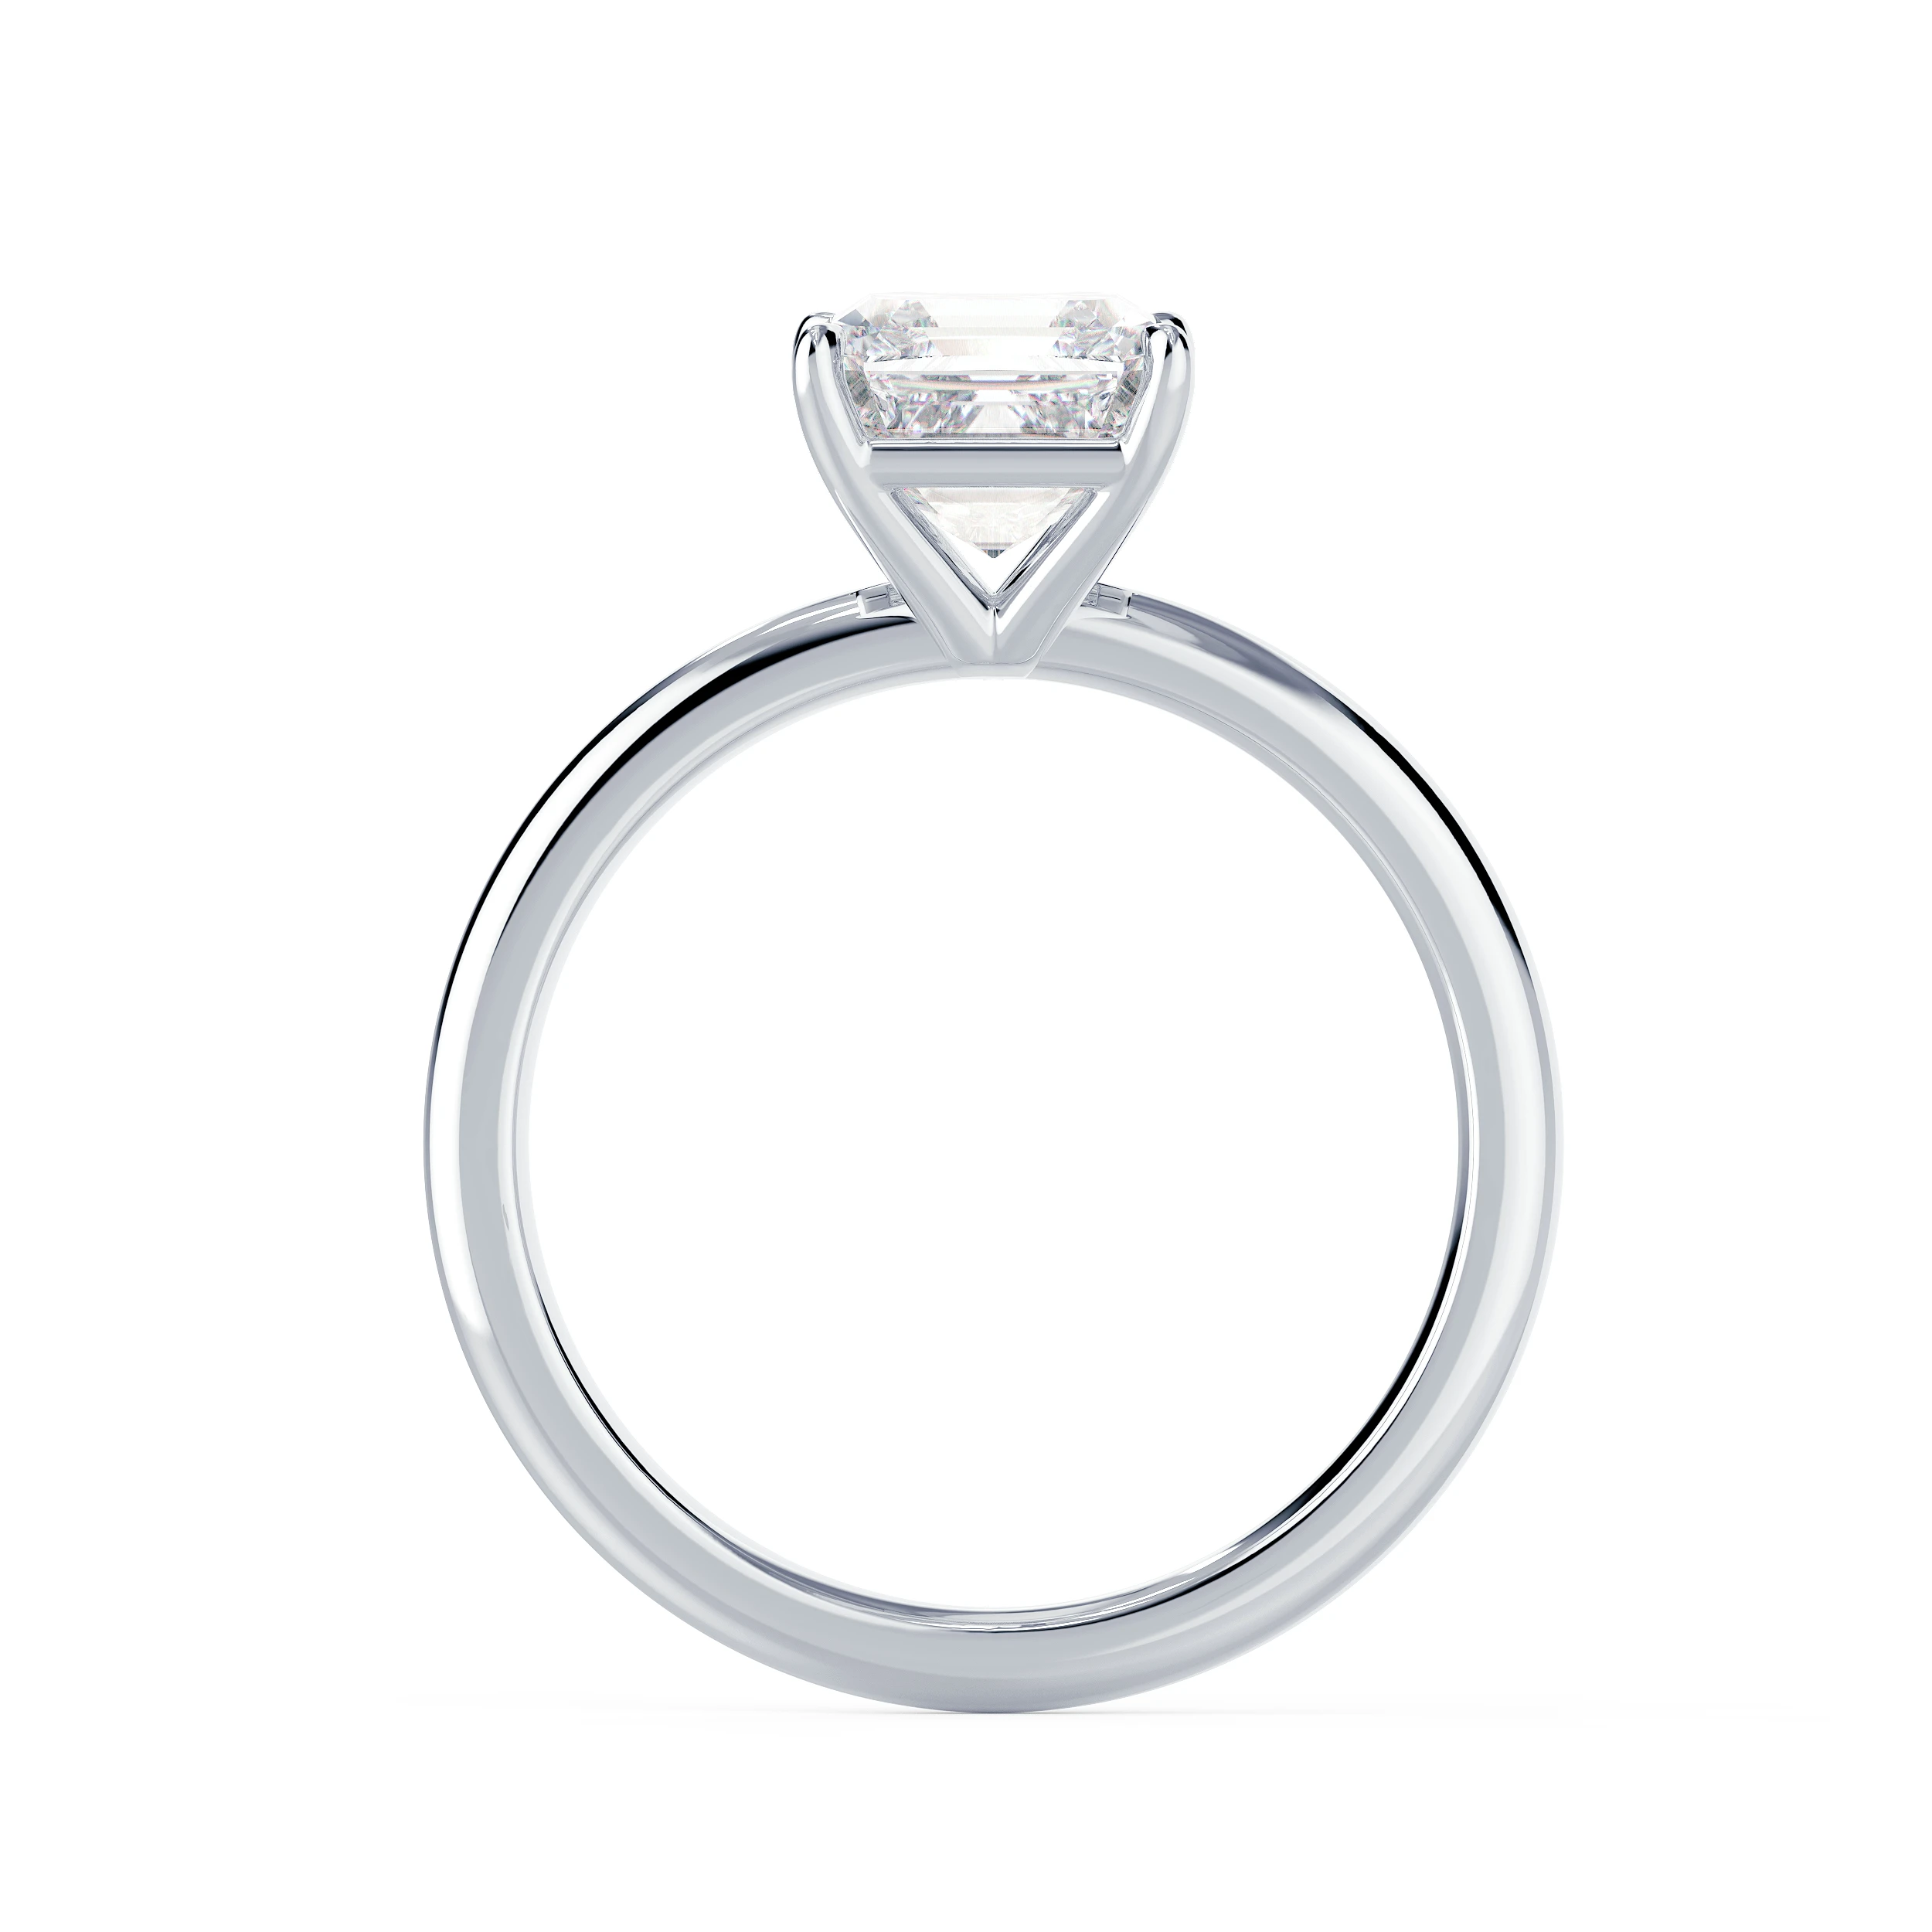 Hand Selected Diamonds set in White Gold Asscher Petite Four Prong Solitaire (Profile View)